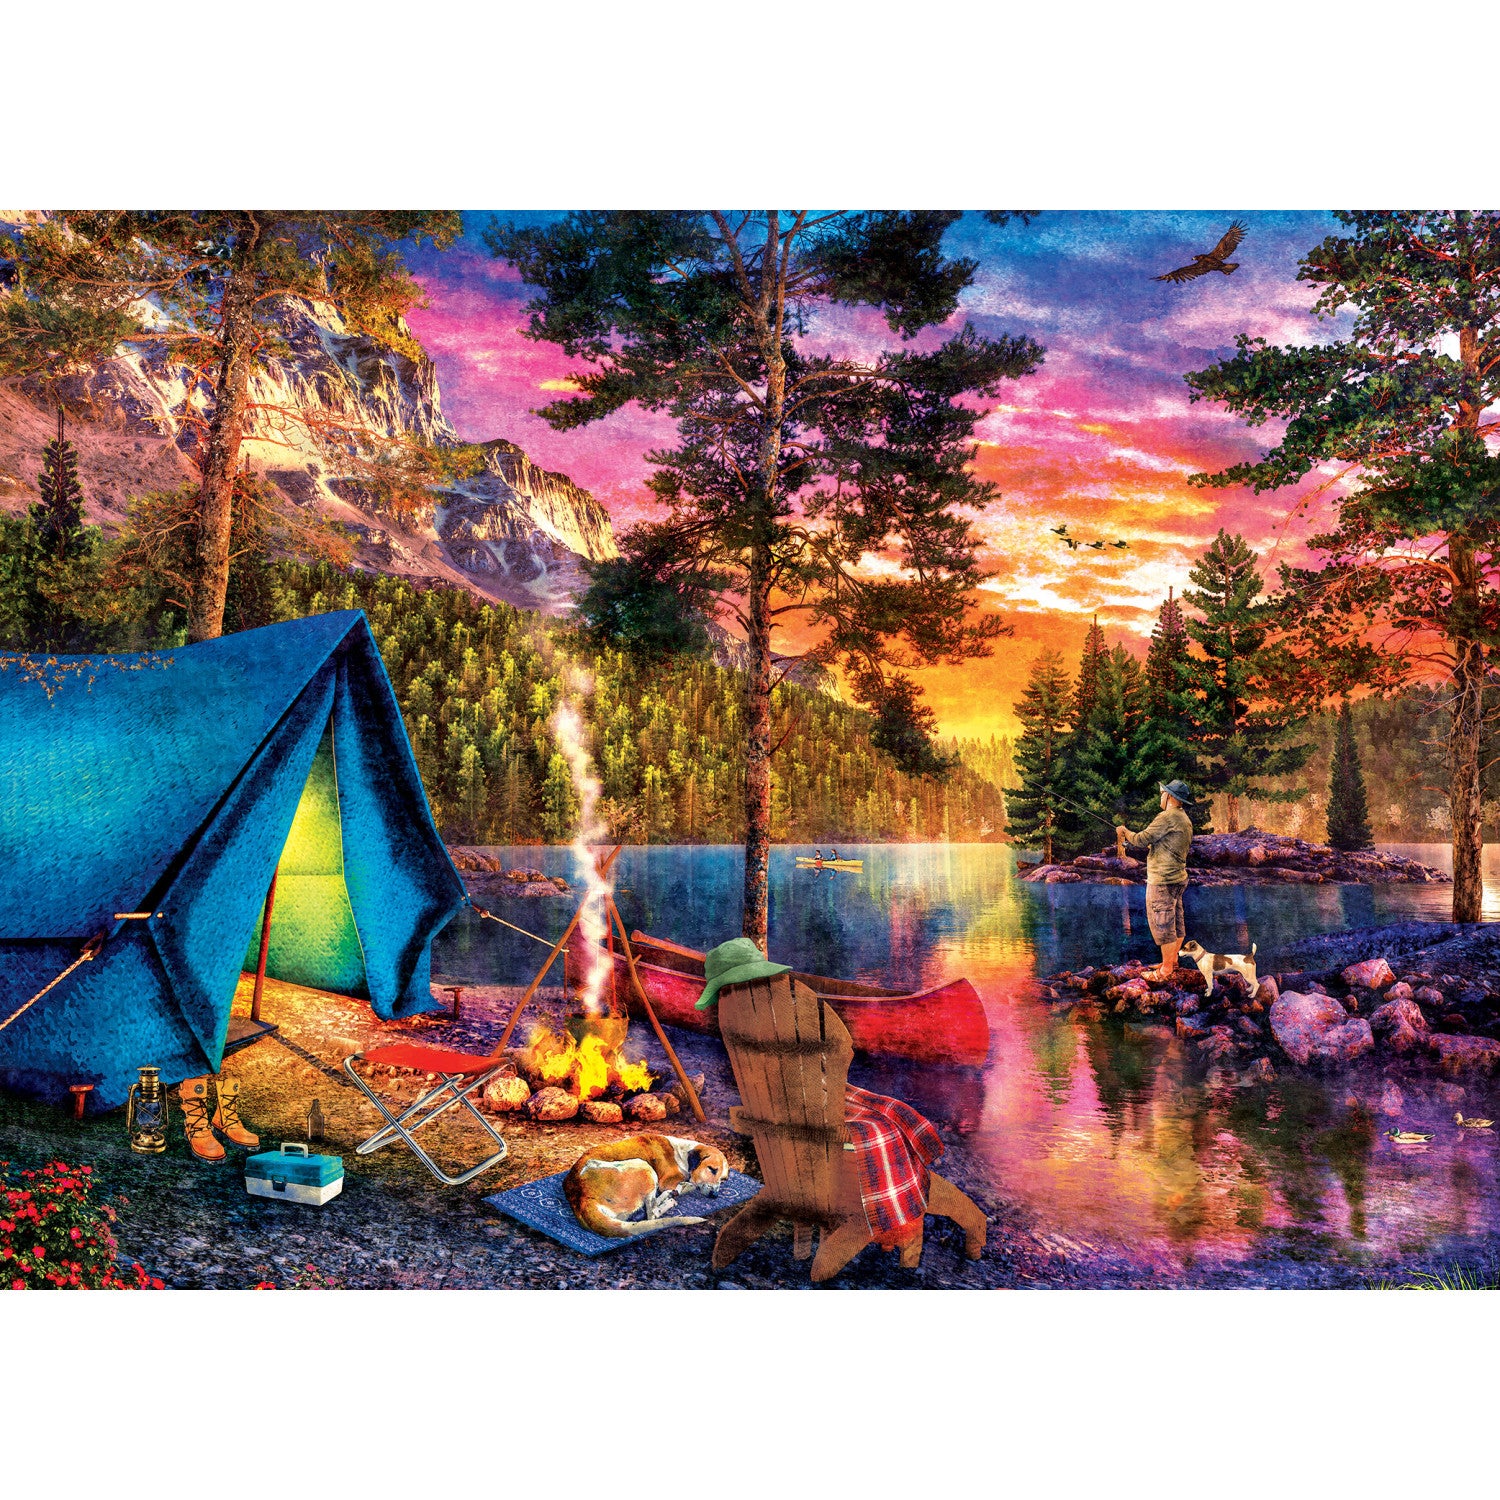 Realtree - Endless Summer Sunset 1000 Piece Puzzle